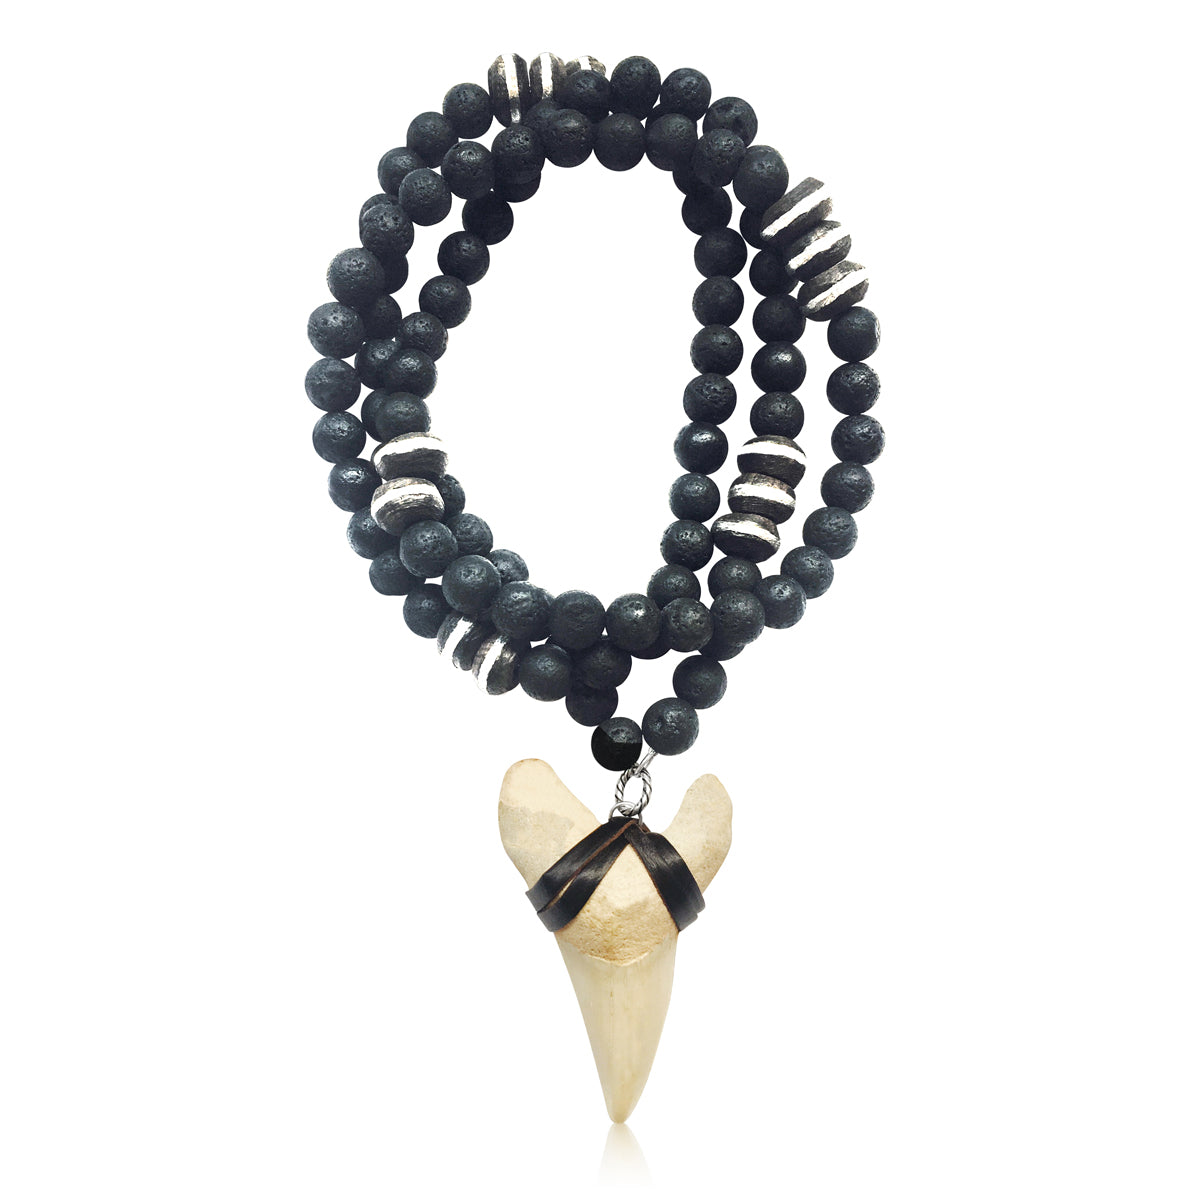 Shark Tooth Necklace for the Adrenaline Hunters and Shark Lovers - Ebony Wood and Lava